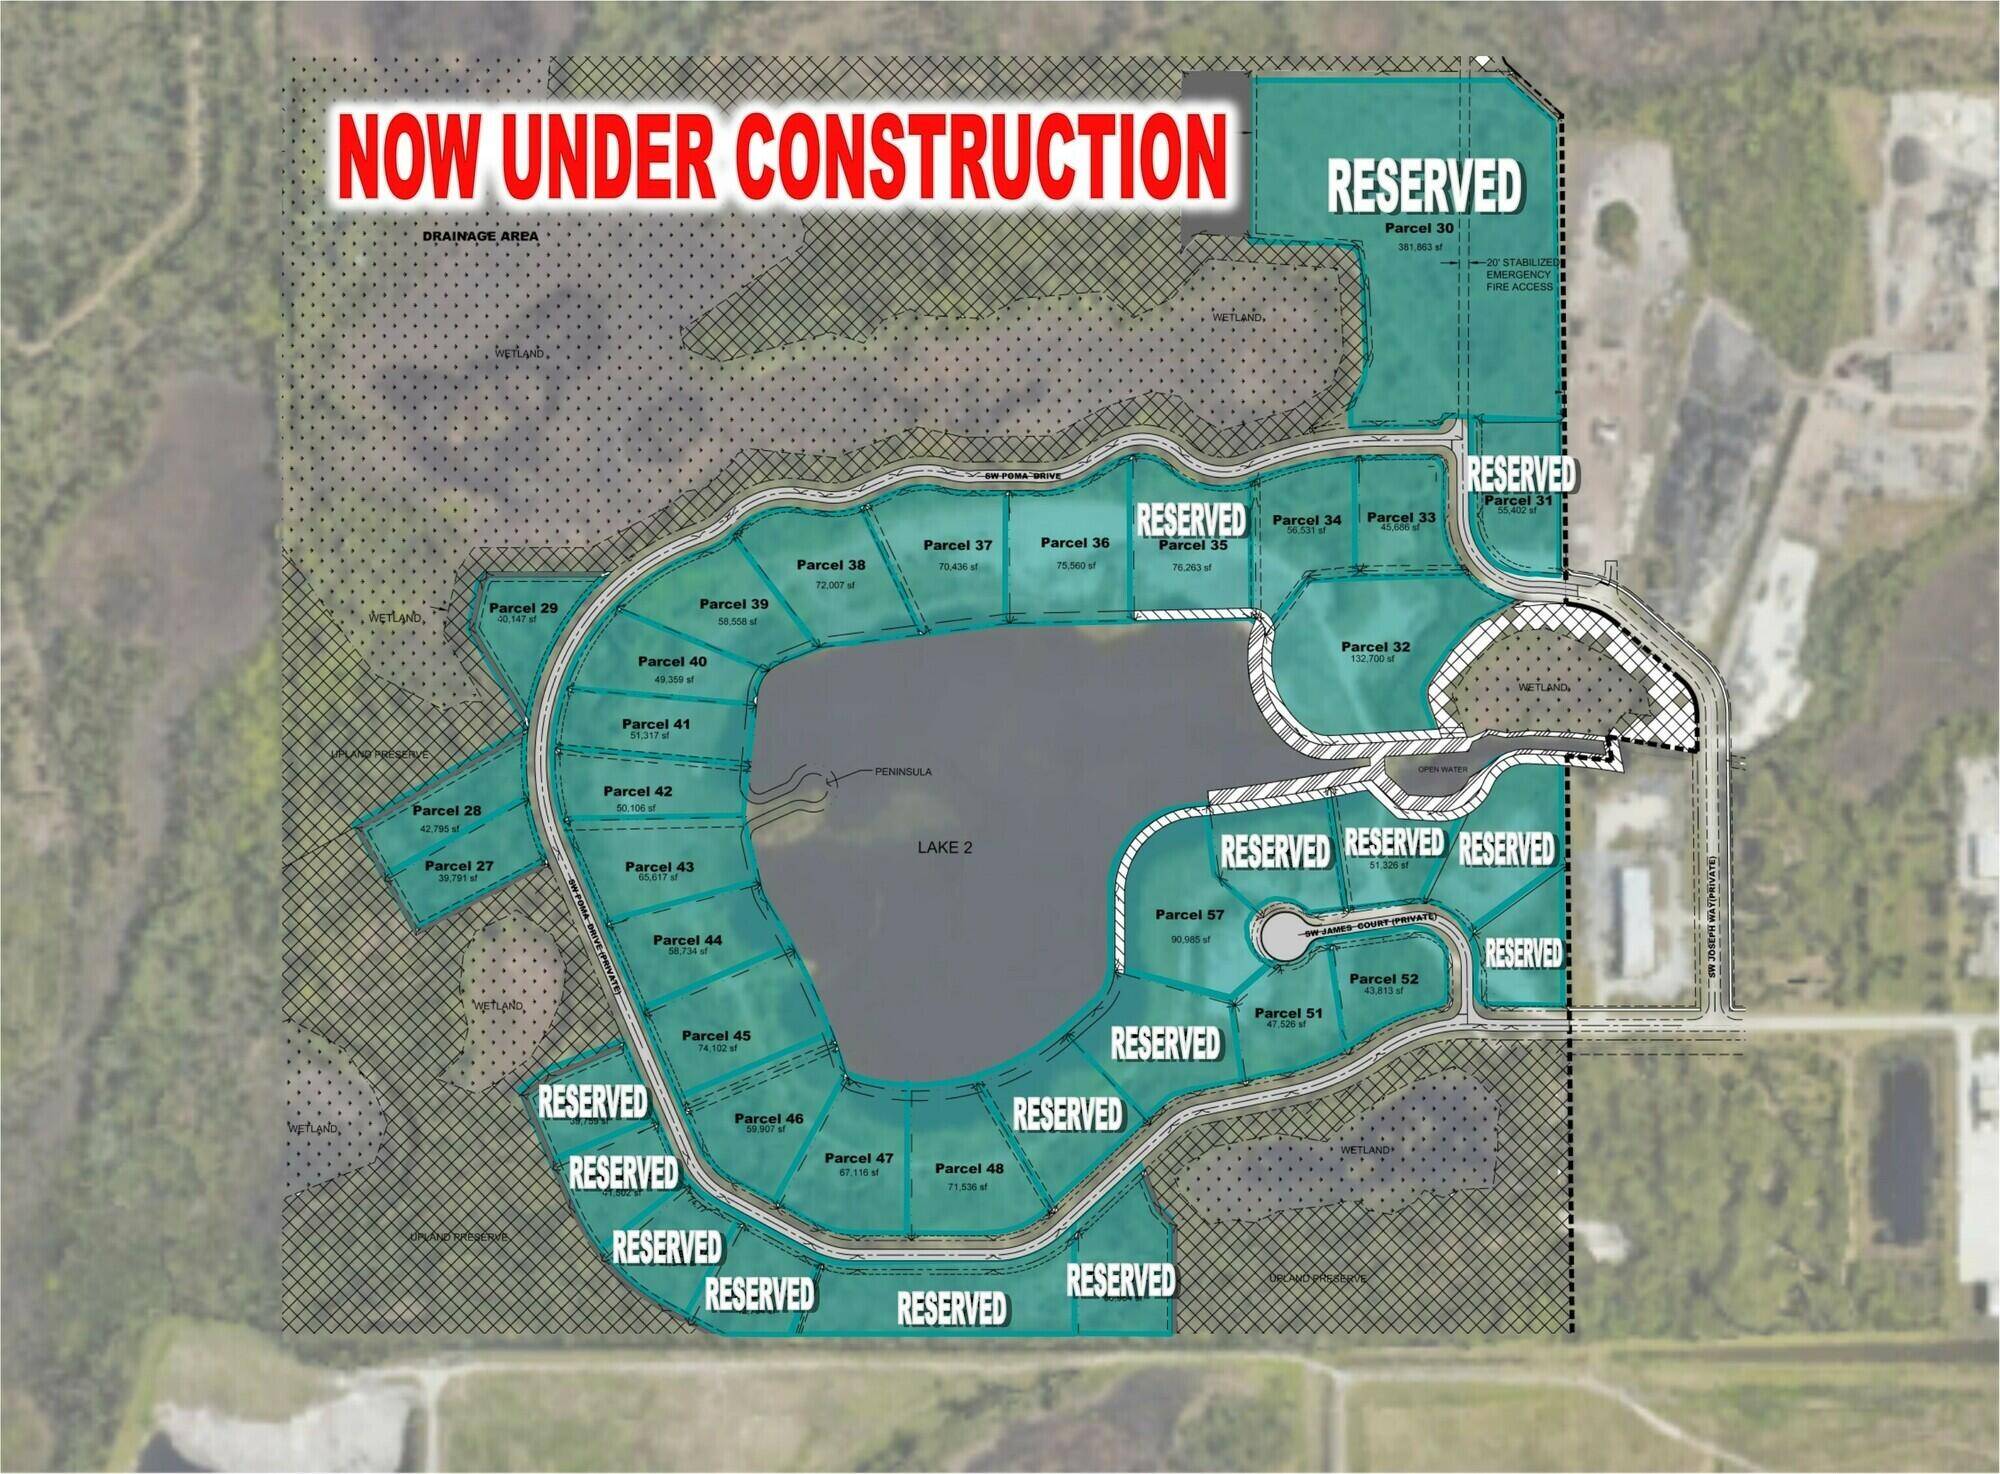 General Industrial Lots. 37 available with reservations being taken.